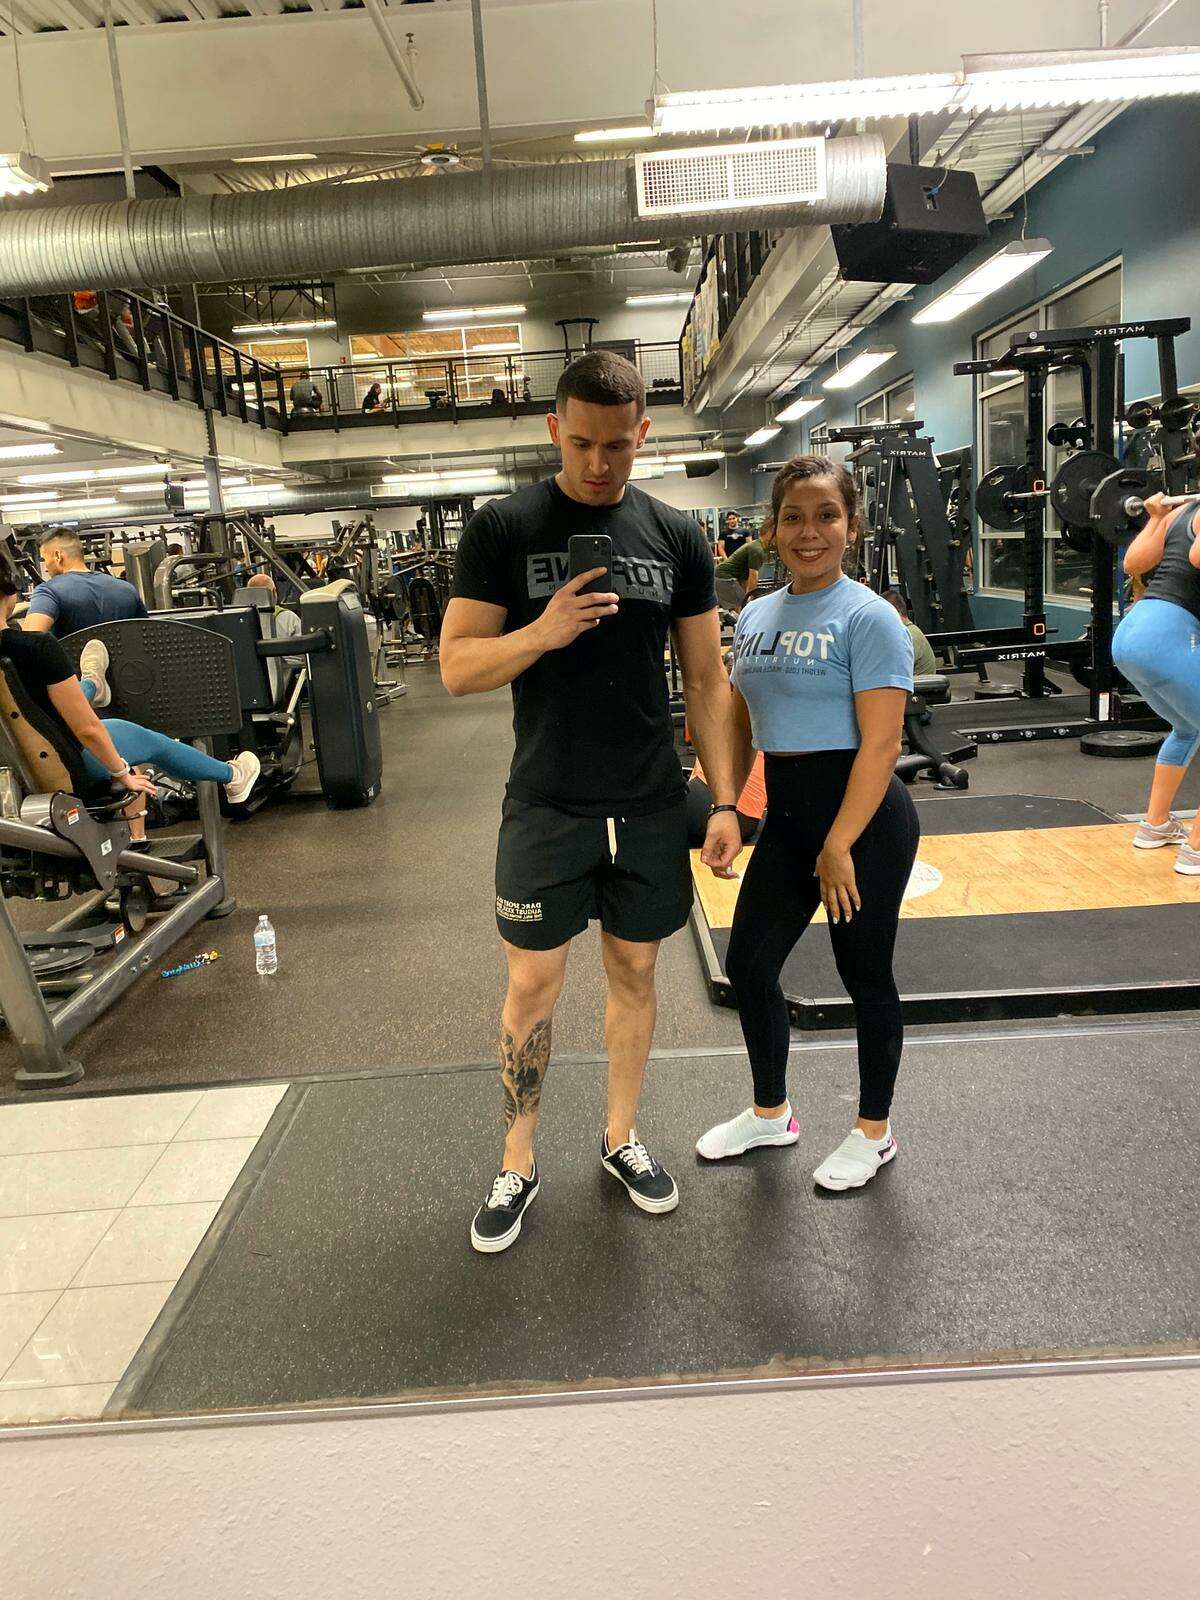 Juan Rico and Laura Gamez at Golds Gym